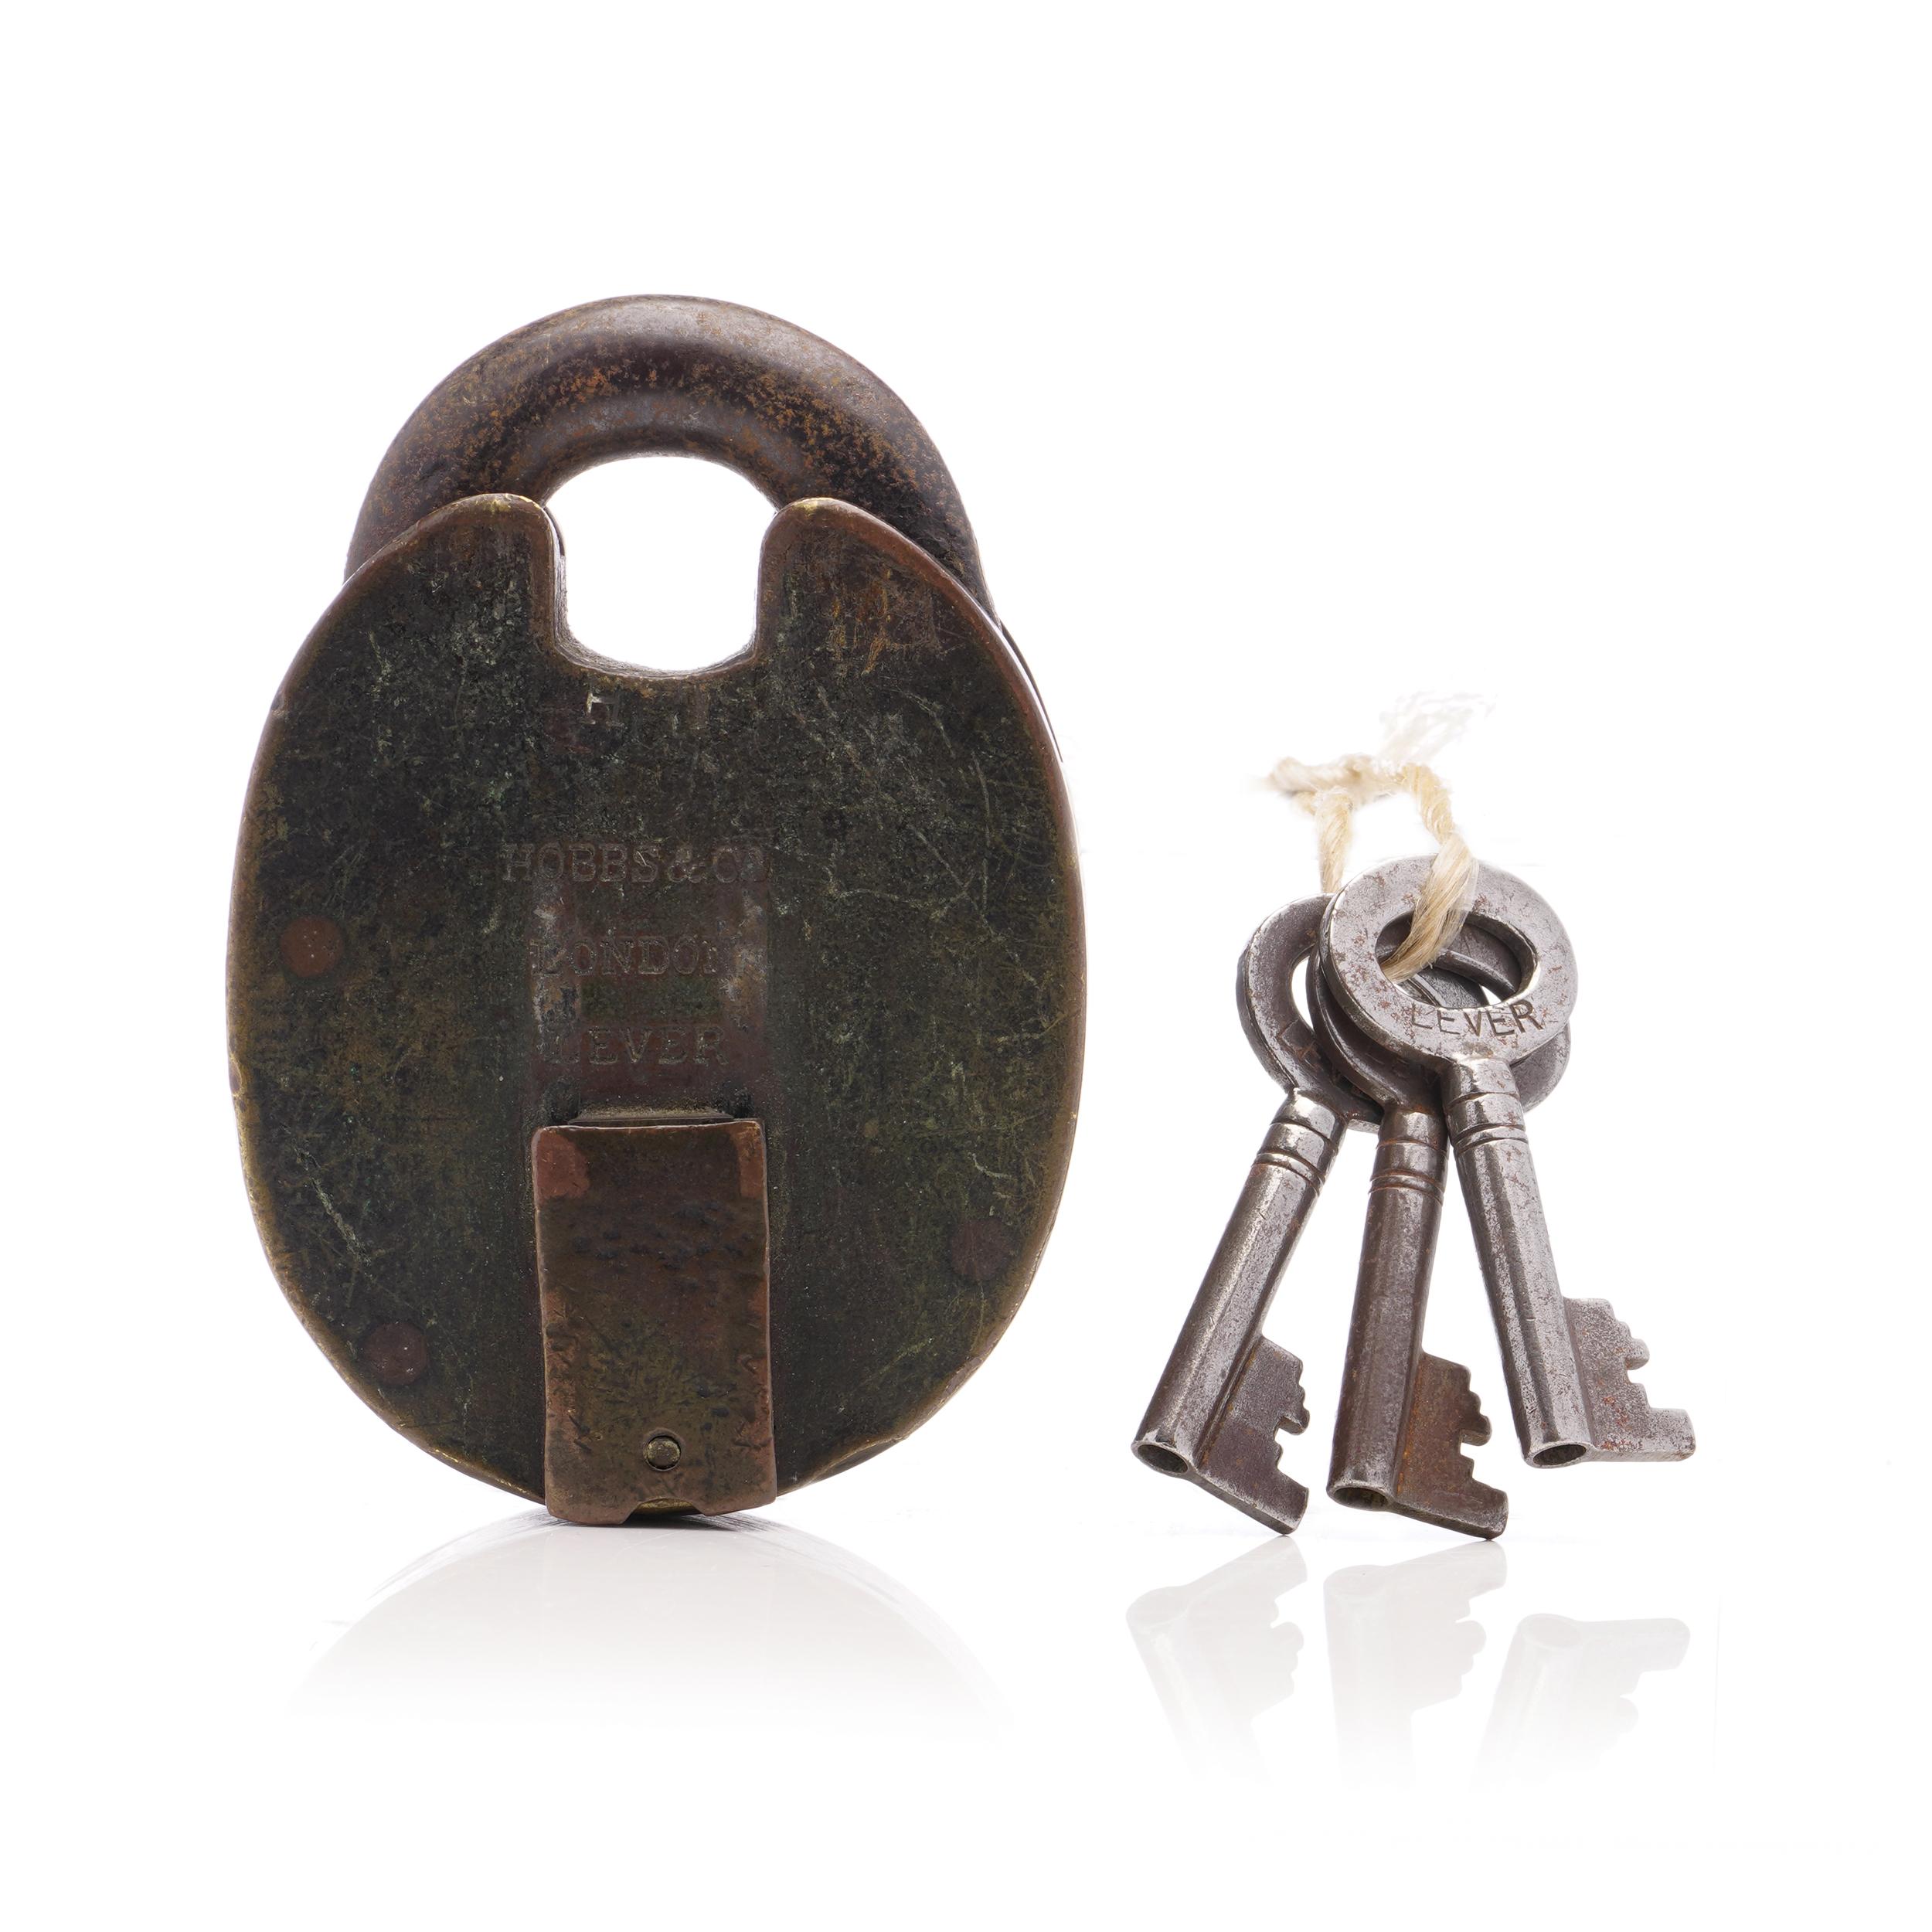 The Hobbs & Co. Victorian heavy iron padlock with its original key is a remarkable piece of history and craftsmanship. This antique lock, measuring 9.2 cm x 6.3 cm x 2.5 cm and weighing 686 grams, represents the ingenuity of its time.

Comes with 2